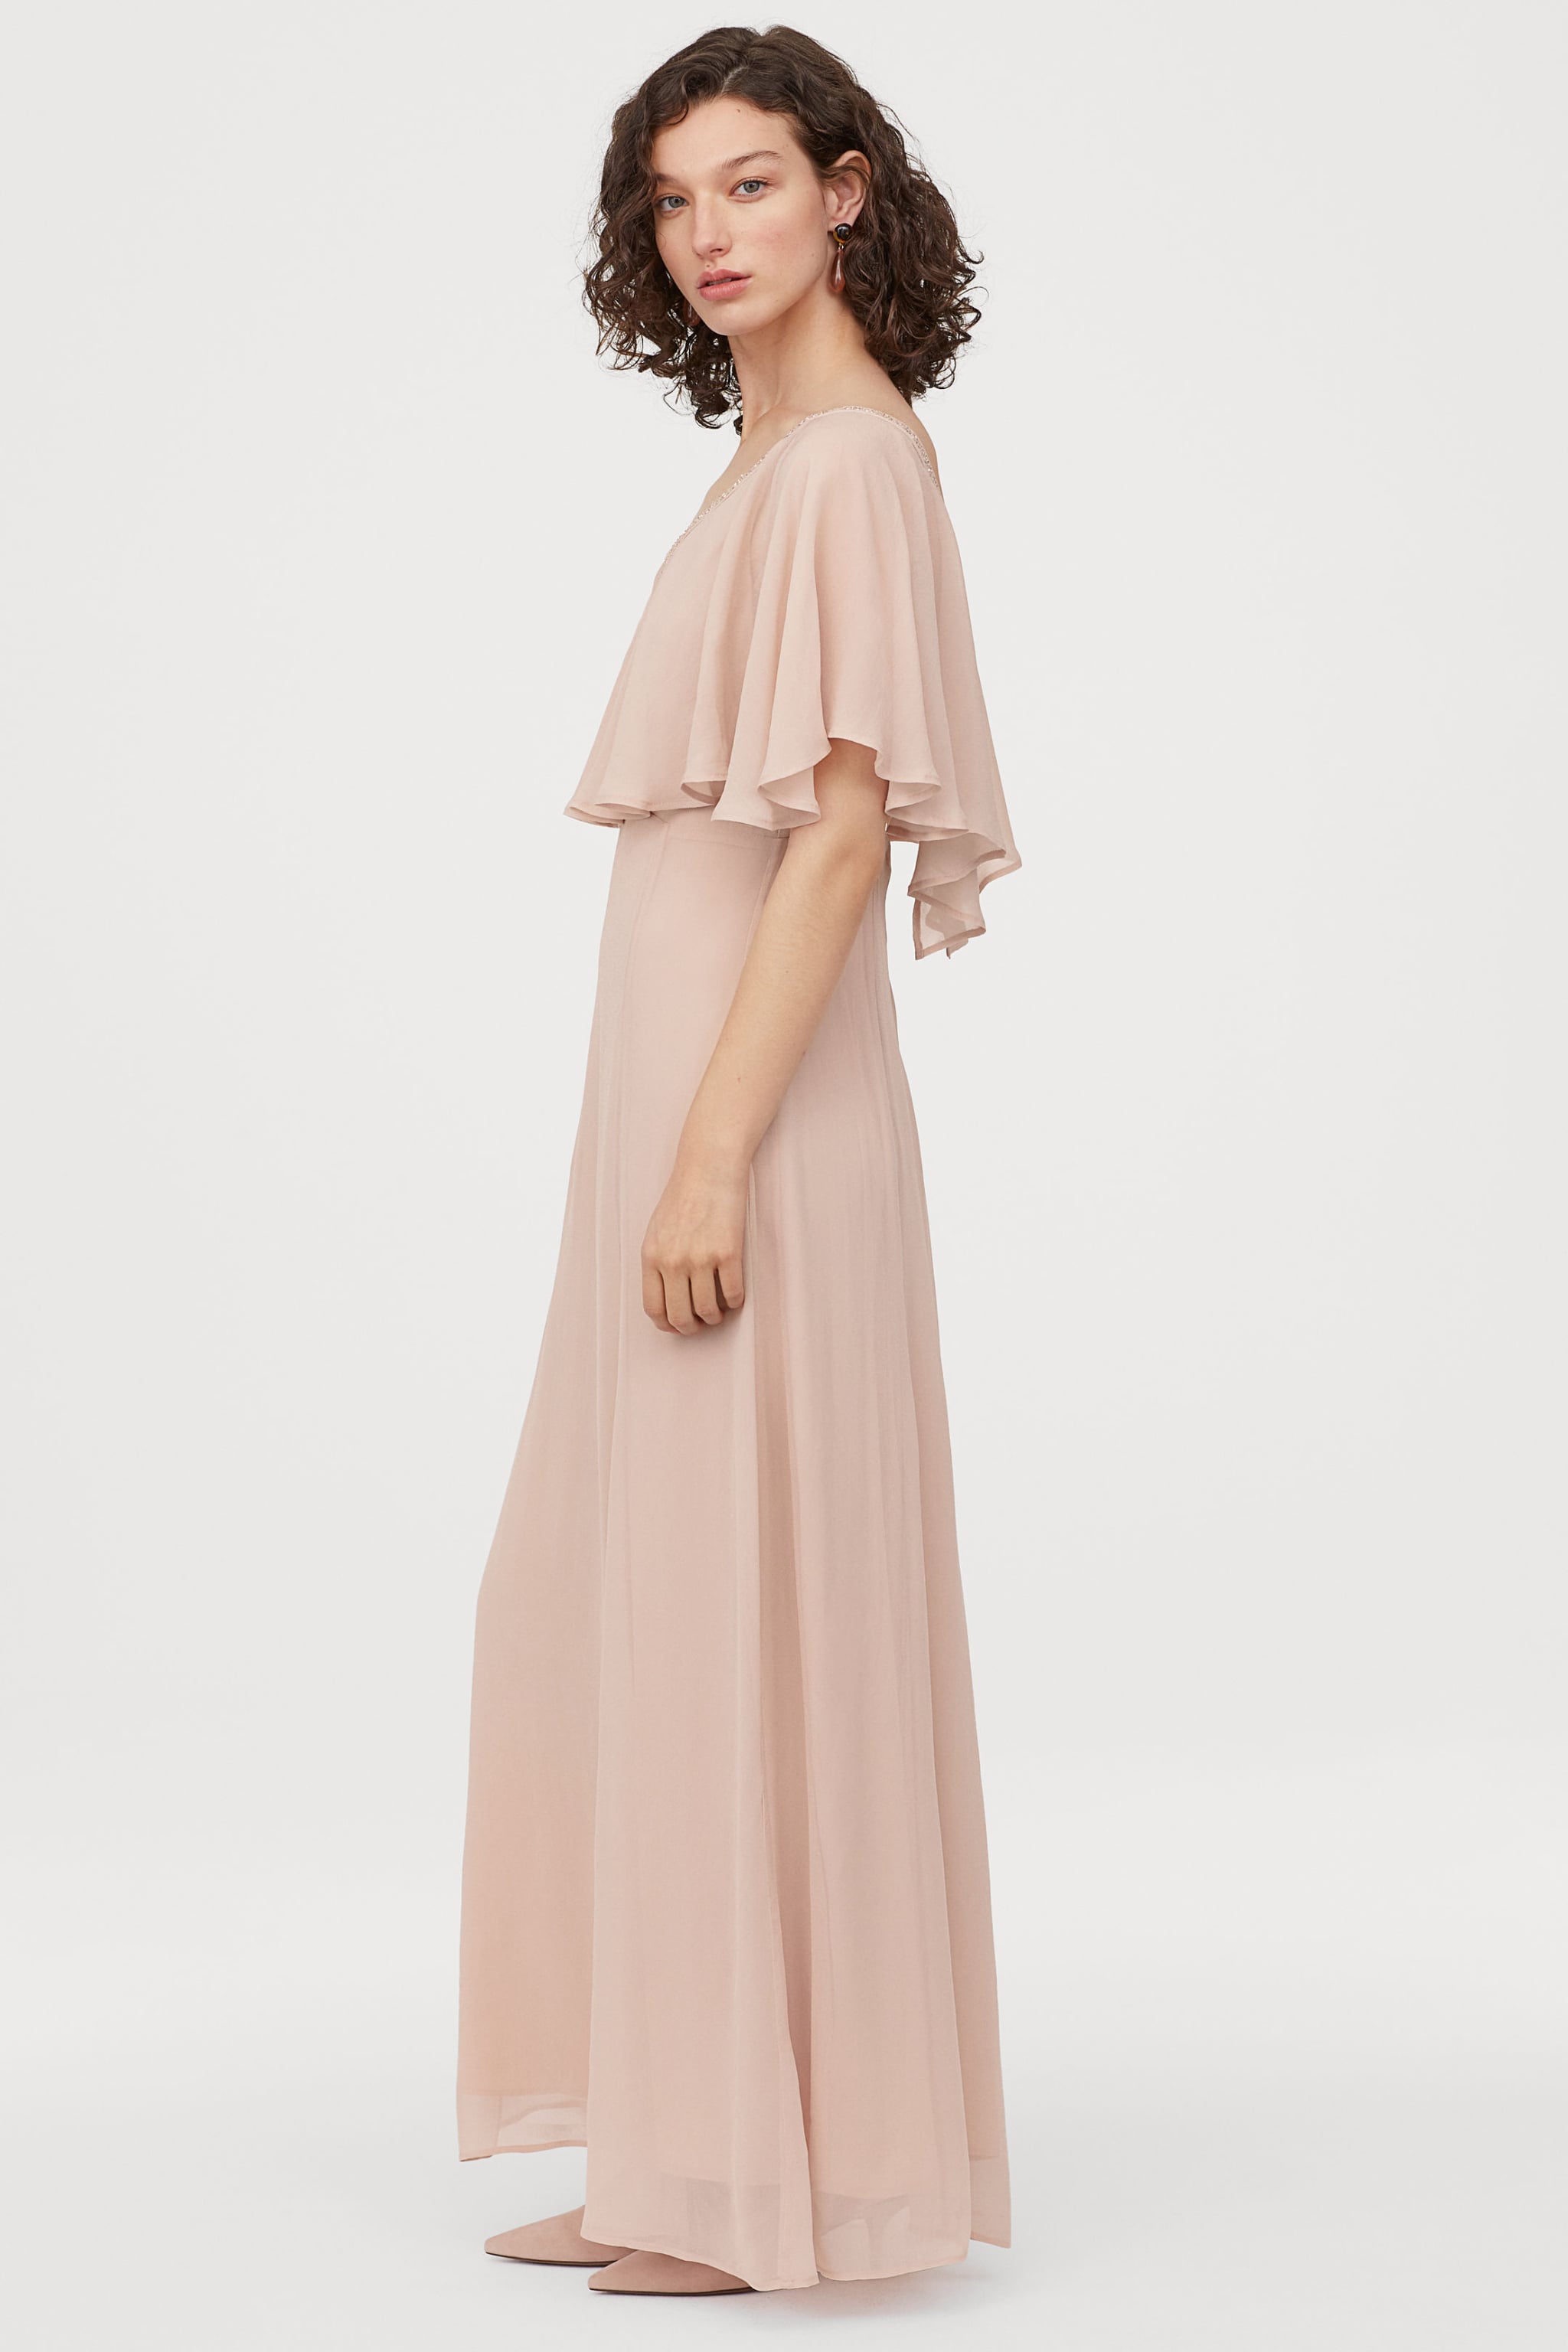 Hu0026M Wedding Guest Dress | 10 Dresses Too Risky to Wear to a Wedding, If You  Want to Stay Friends With the Bride | POPSUGAR Fashion UK Photo 16